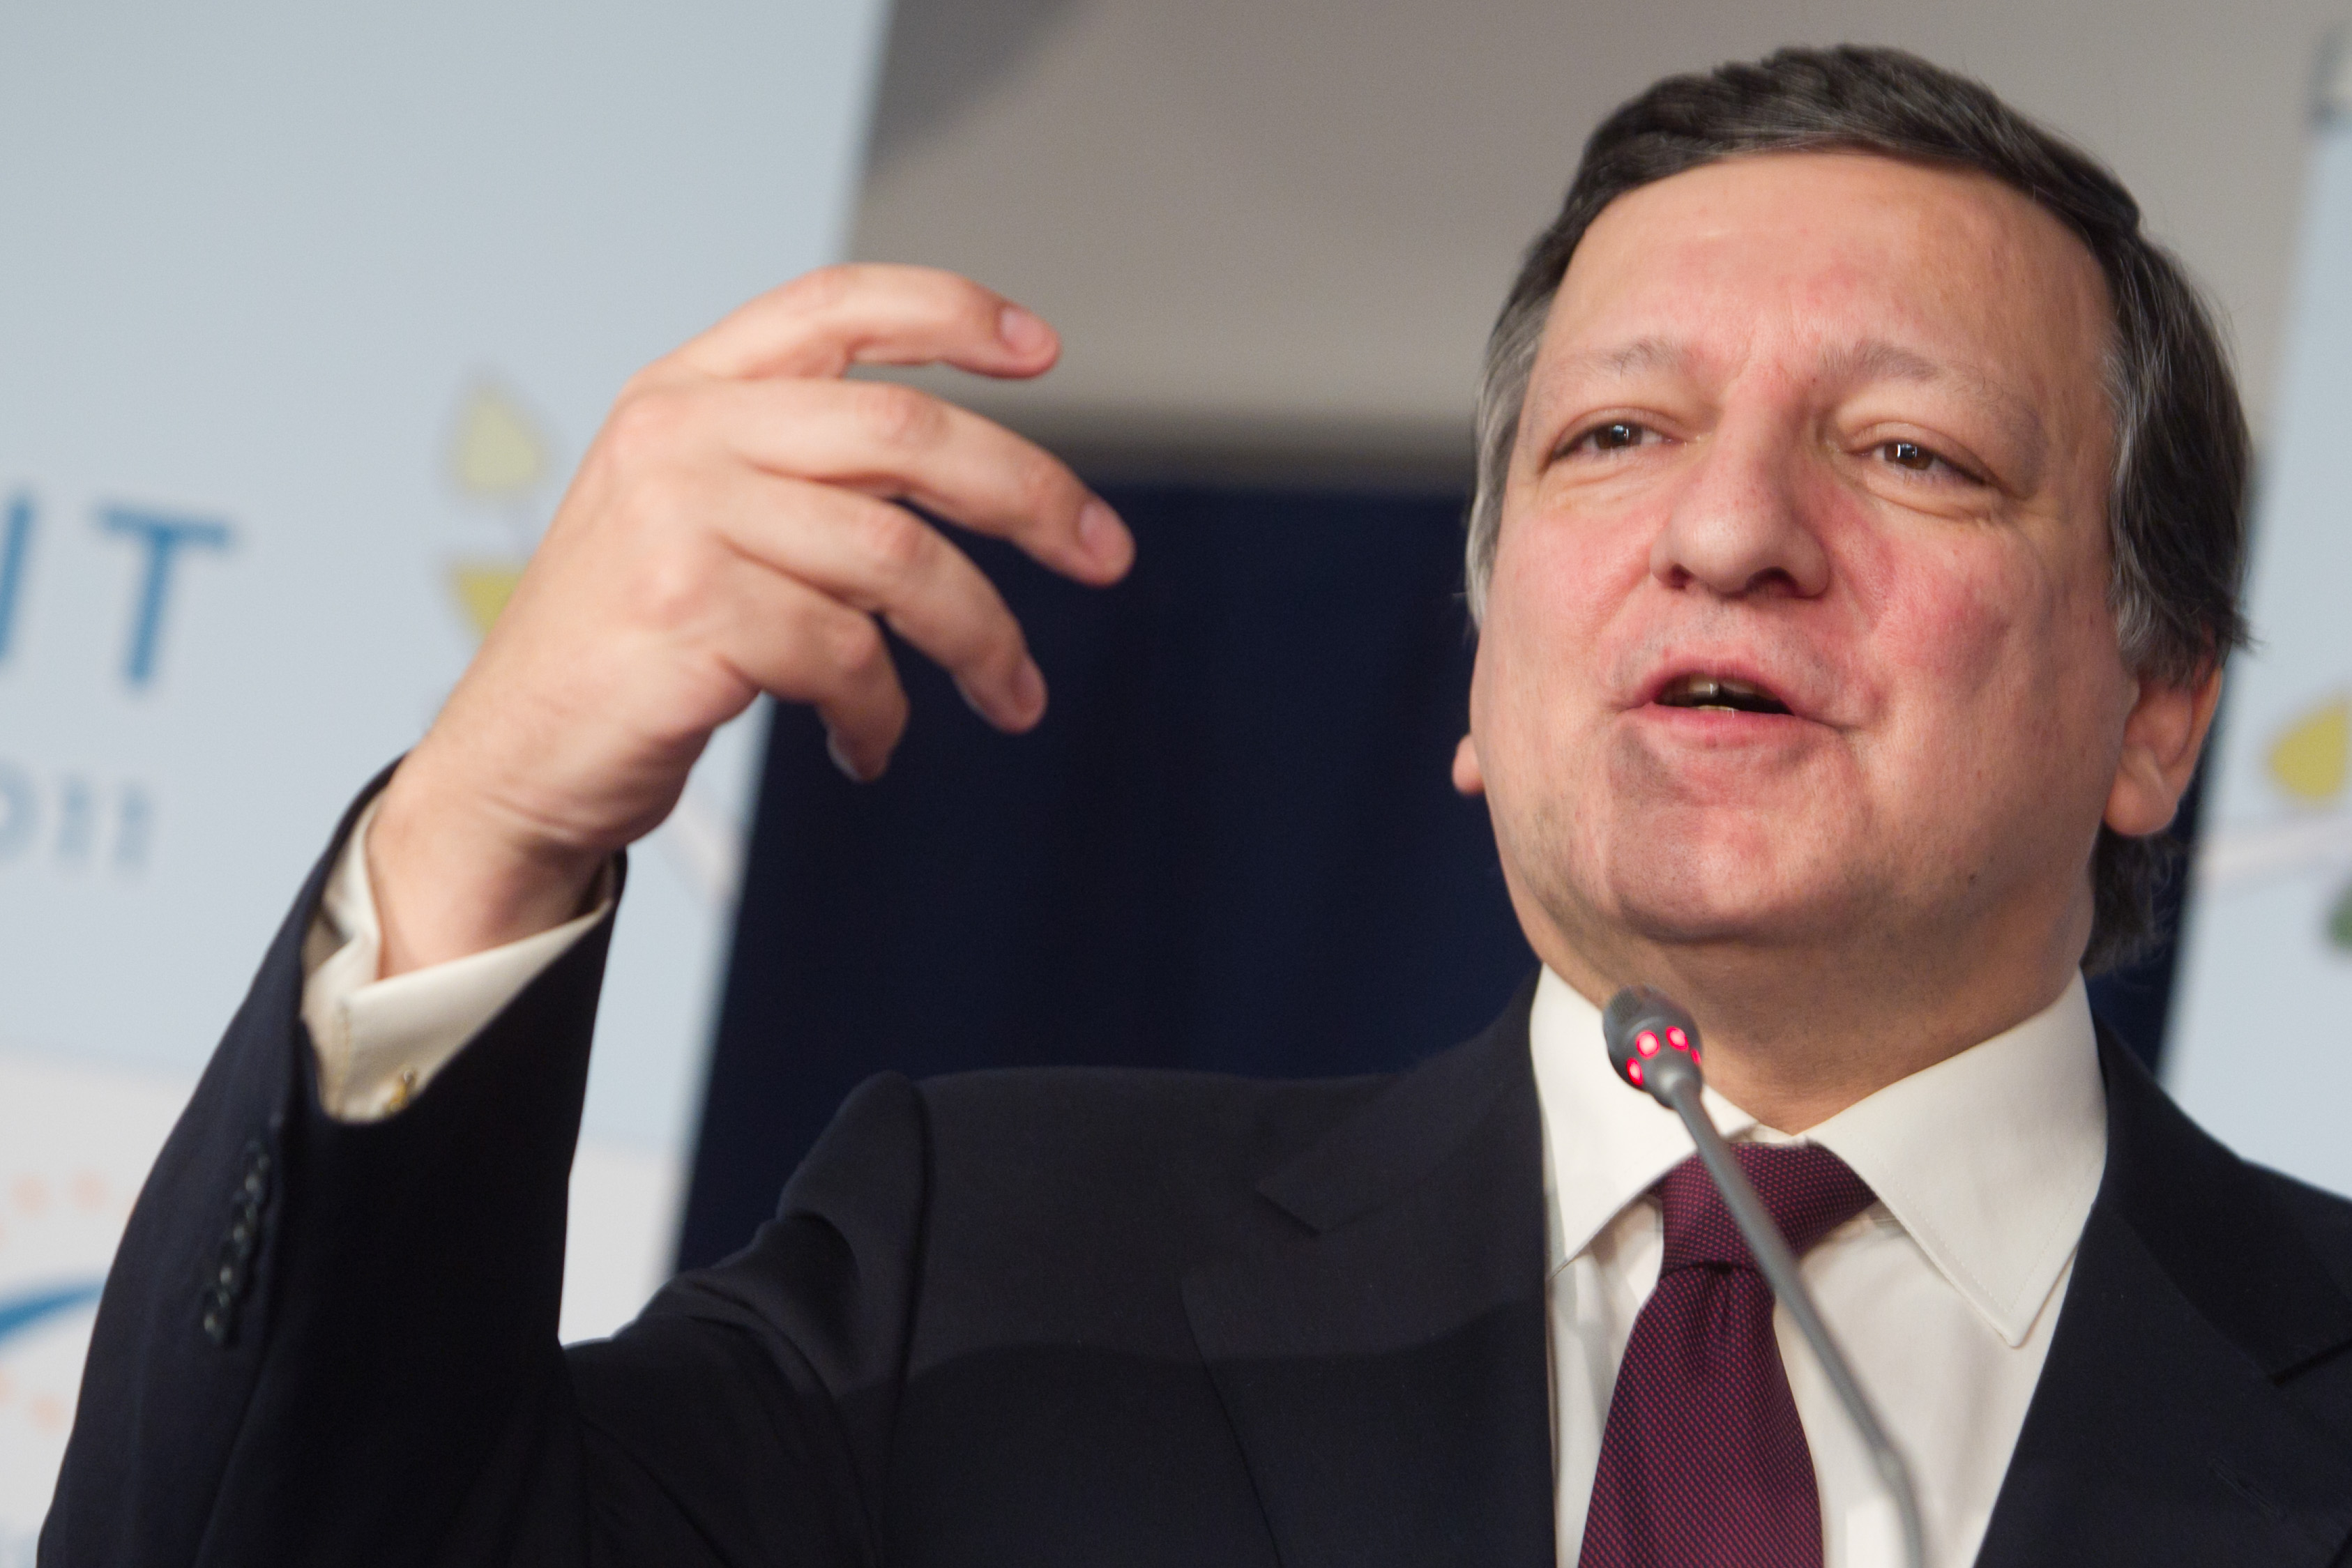 Barroso reminded the EU leadership that the EU was the largest tourism destination in the world, accounting for nearly half the total tourist arrivals of over 1 billion tourists who travelled in a foreign country in the year 2014.